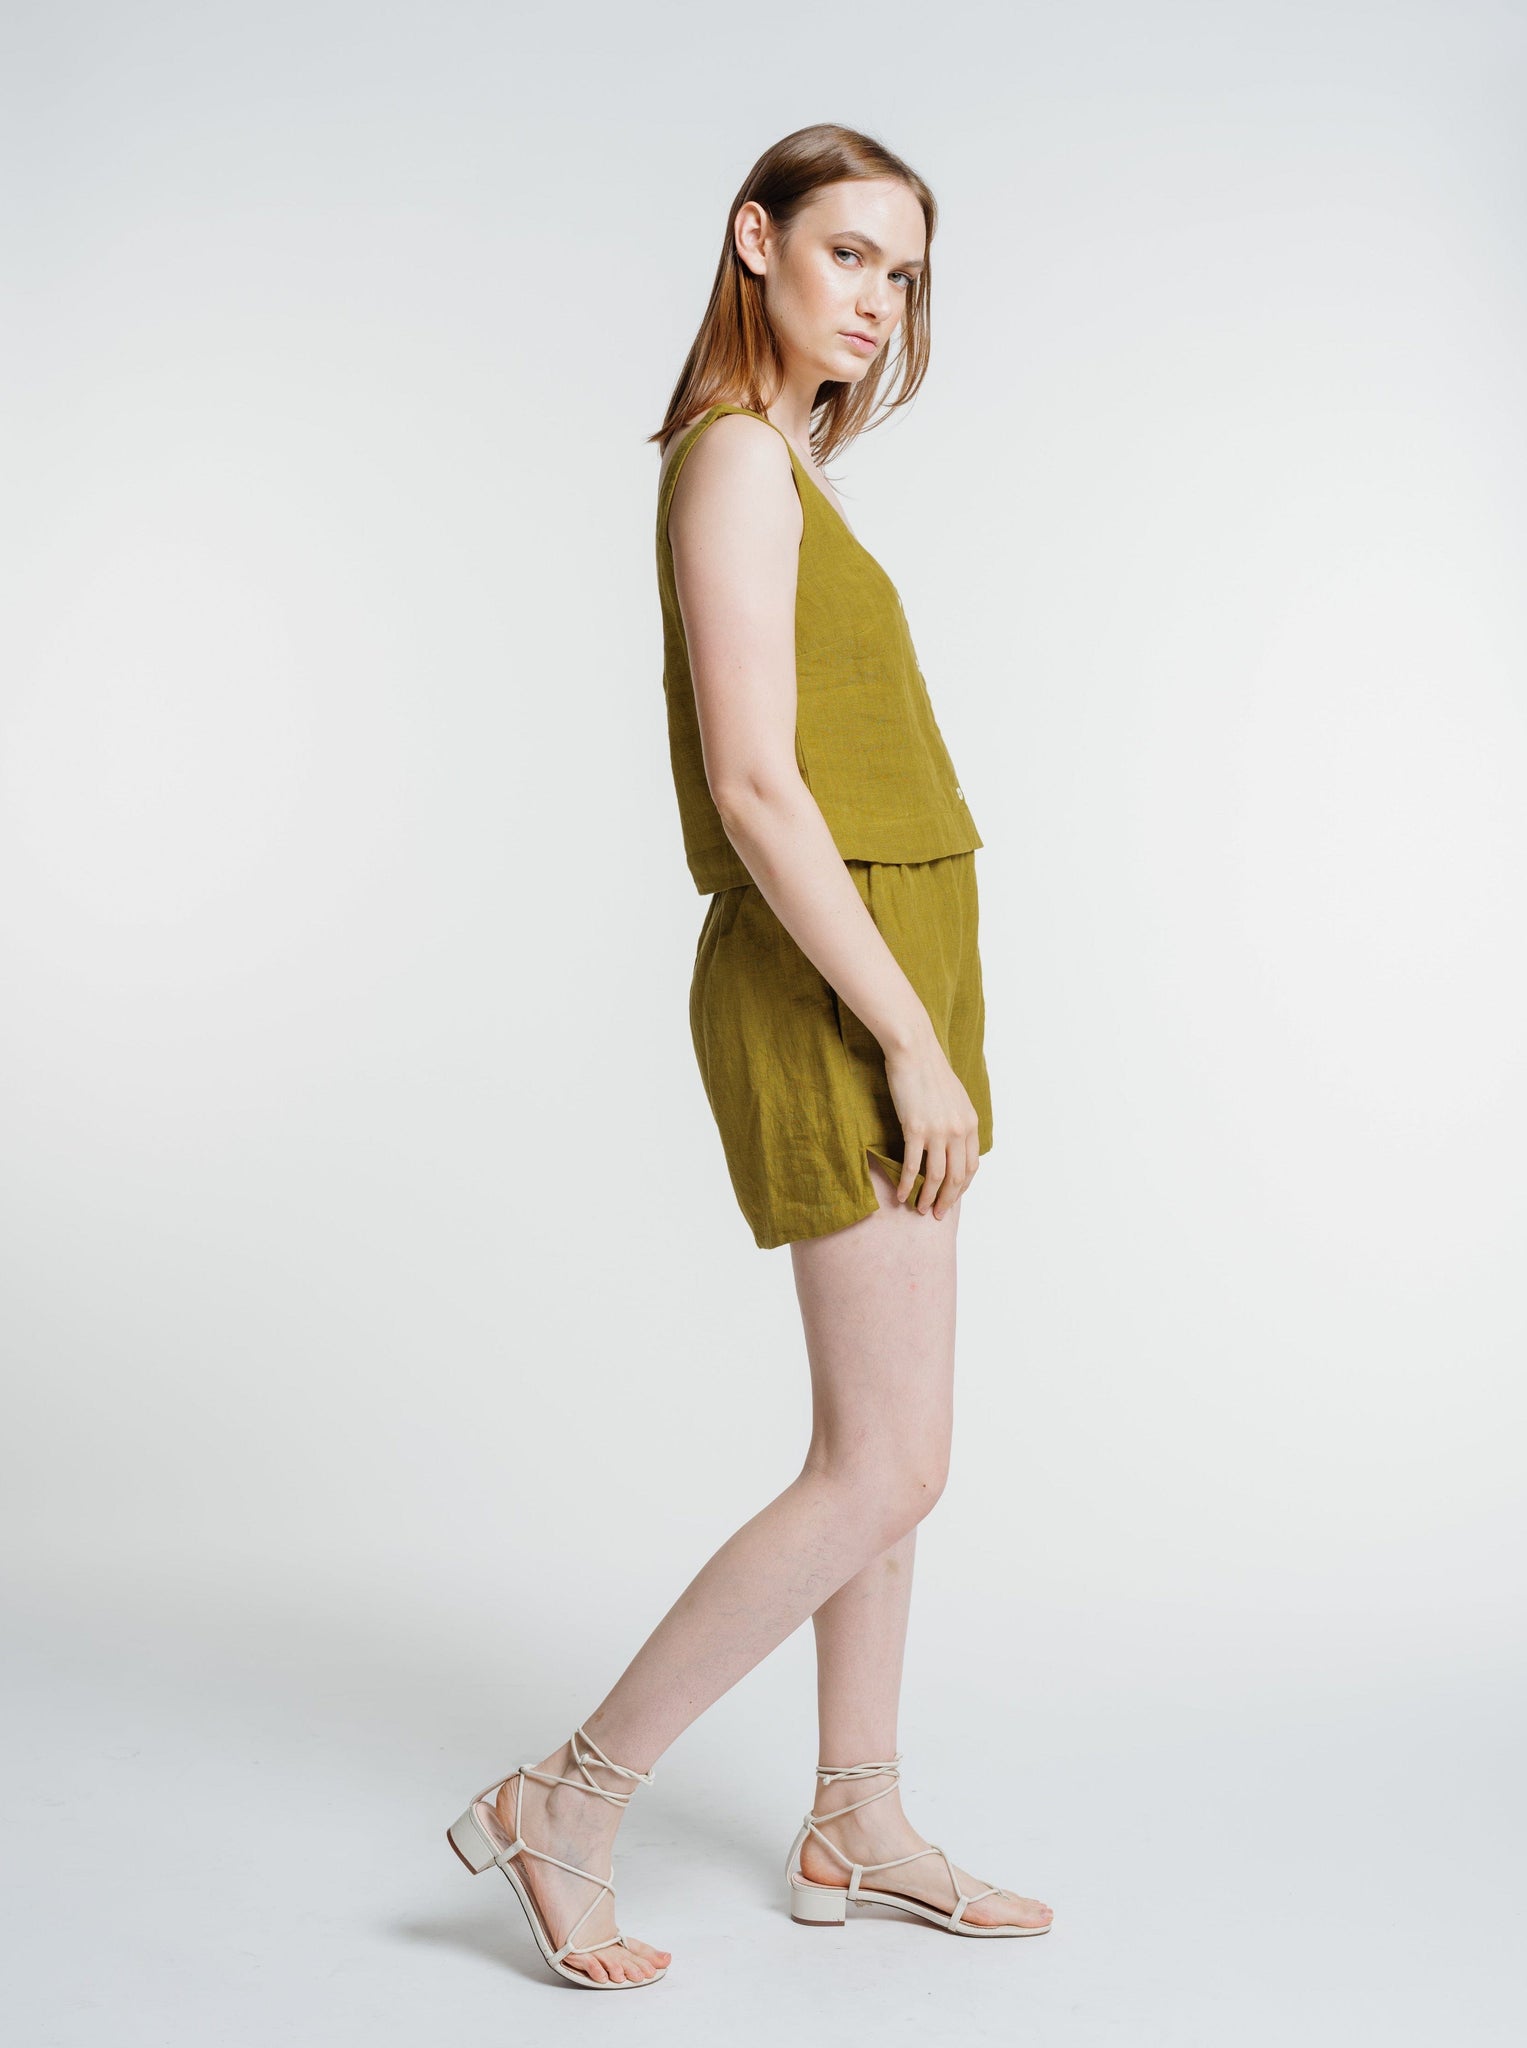 The model is wearing an Everyday Short - Dried Tobacco with an elastic waistband and sandals.